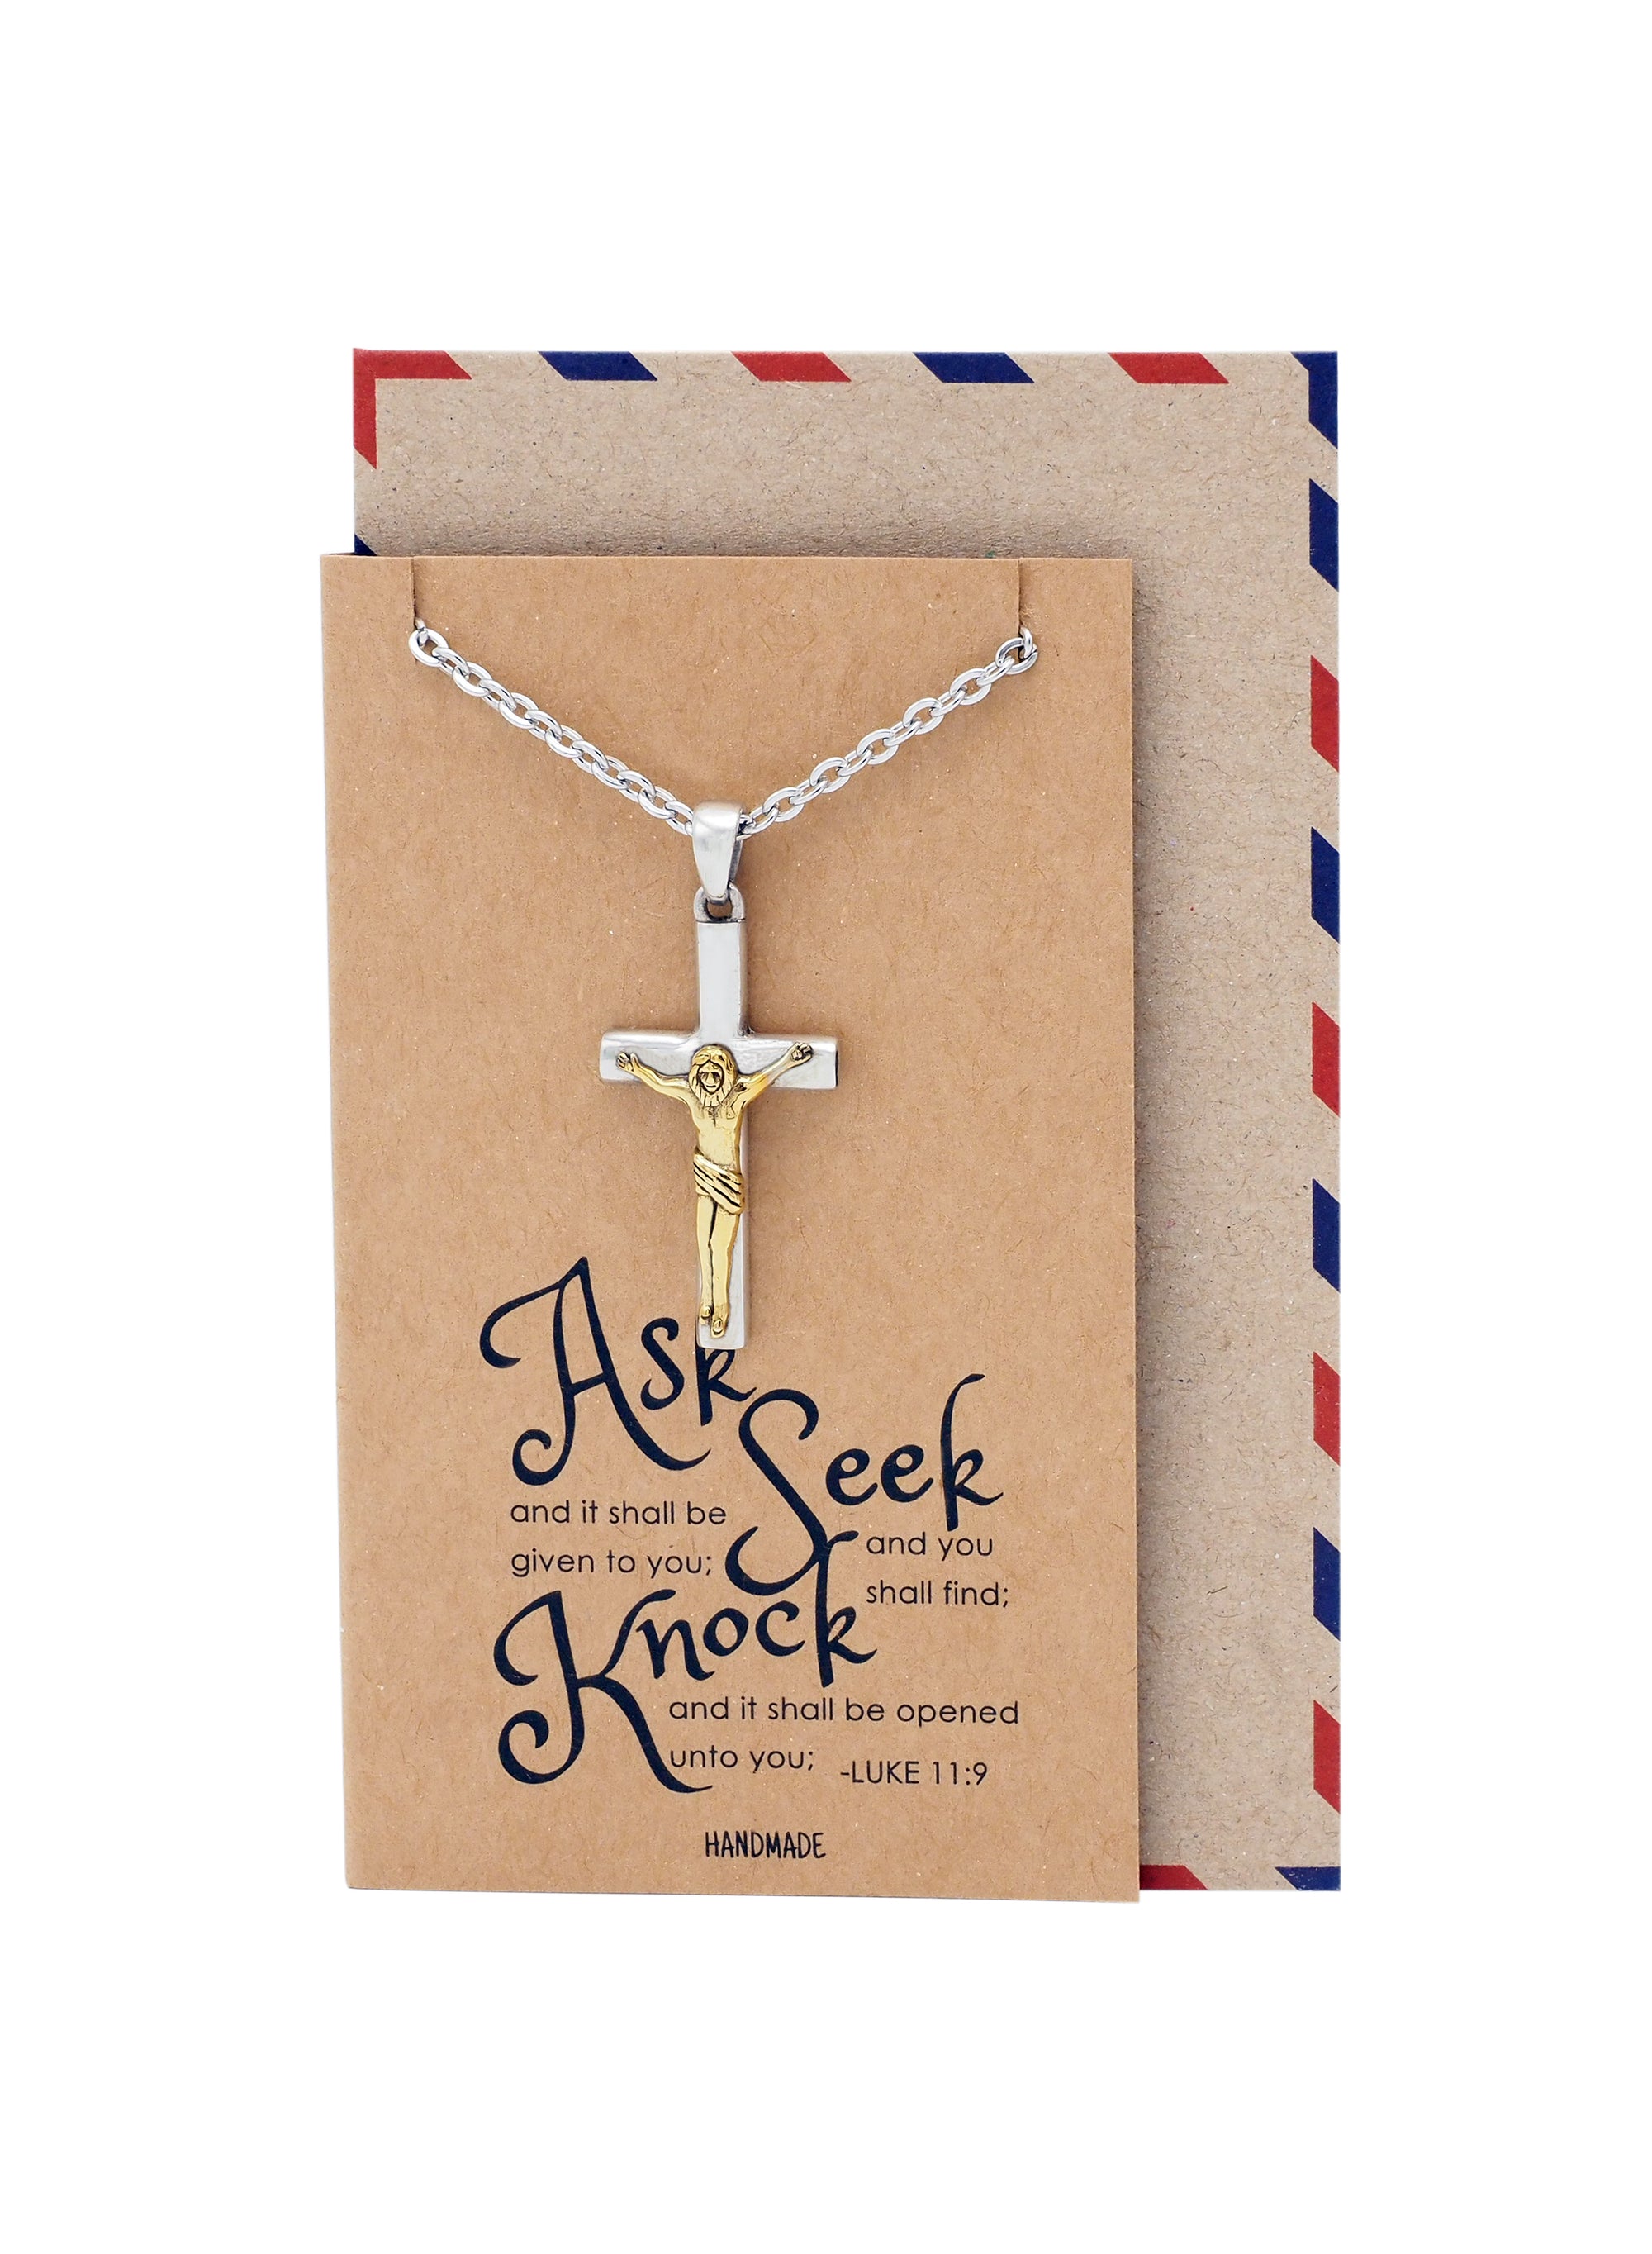 Kyrie Cross Pendant, Religious Jewelry, Gift for Him, Inspirational Jewelry with Inspirational Card